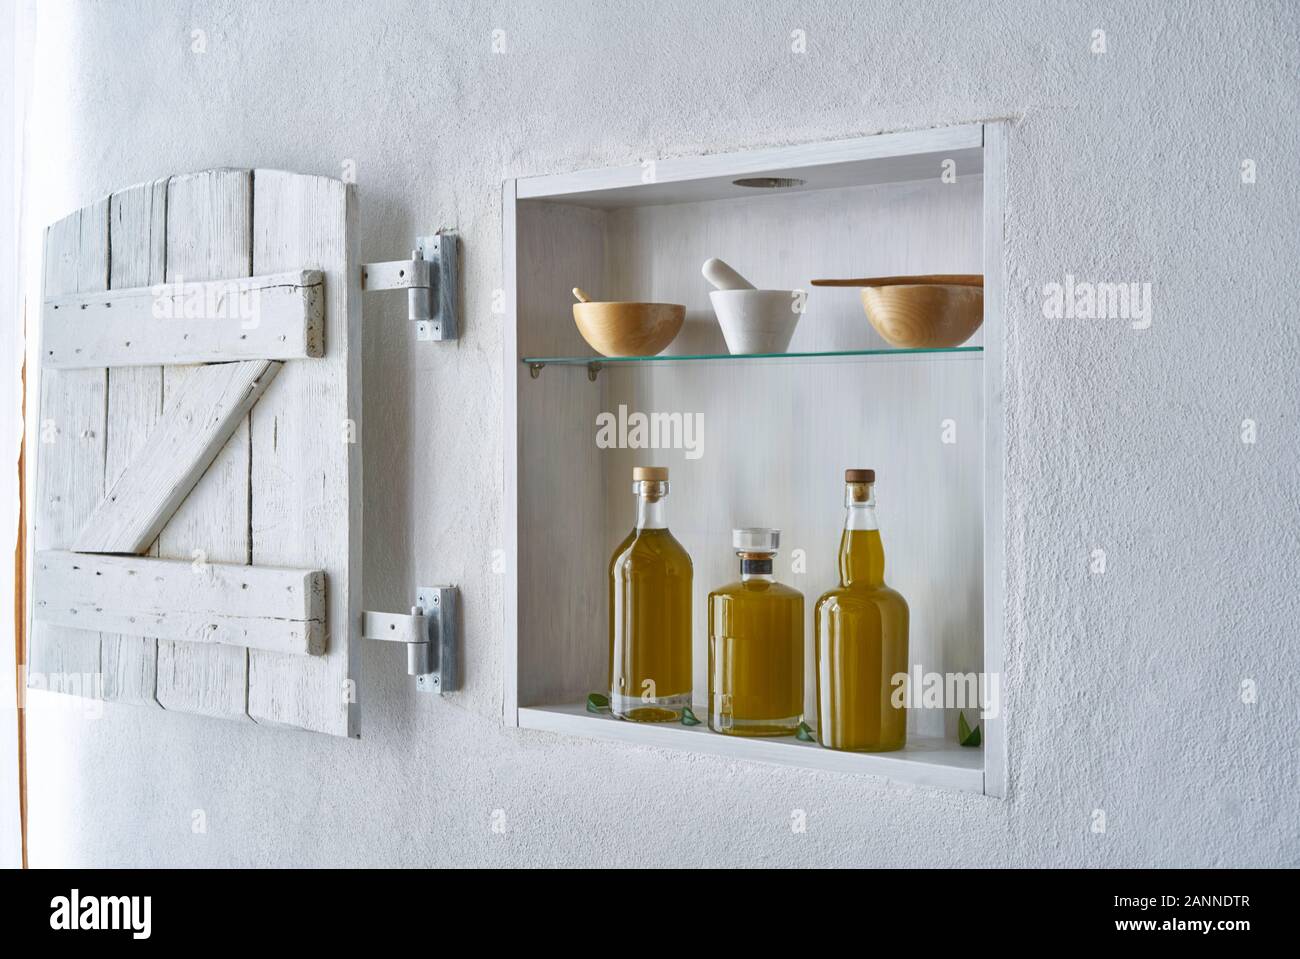 house home design wall shelf Olive oil bottle oils three bottles food cooking mediterranean natural organic tuscany beauty country house healthy Stock Photo